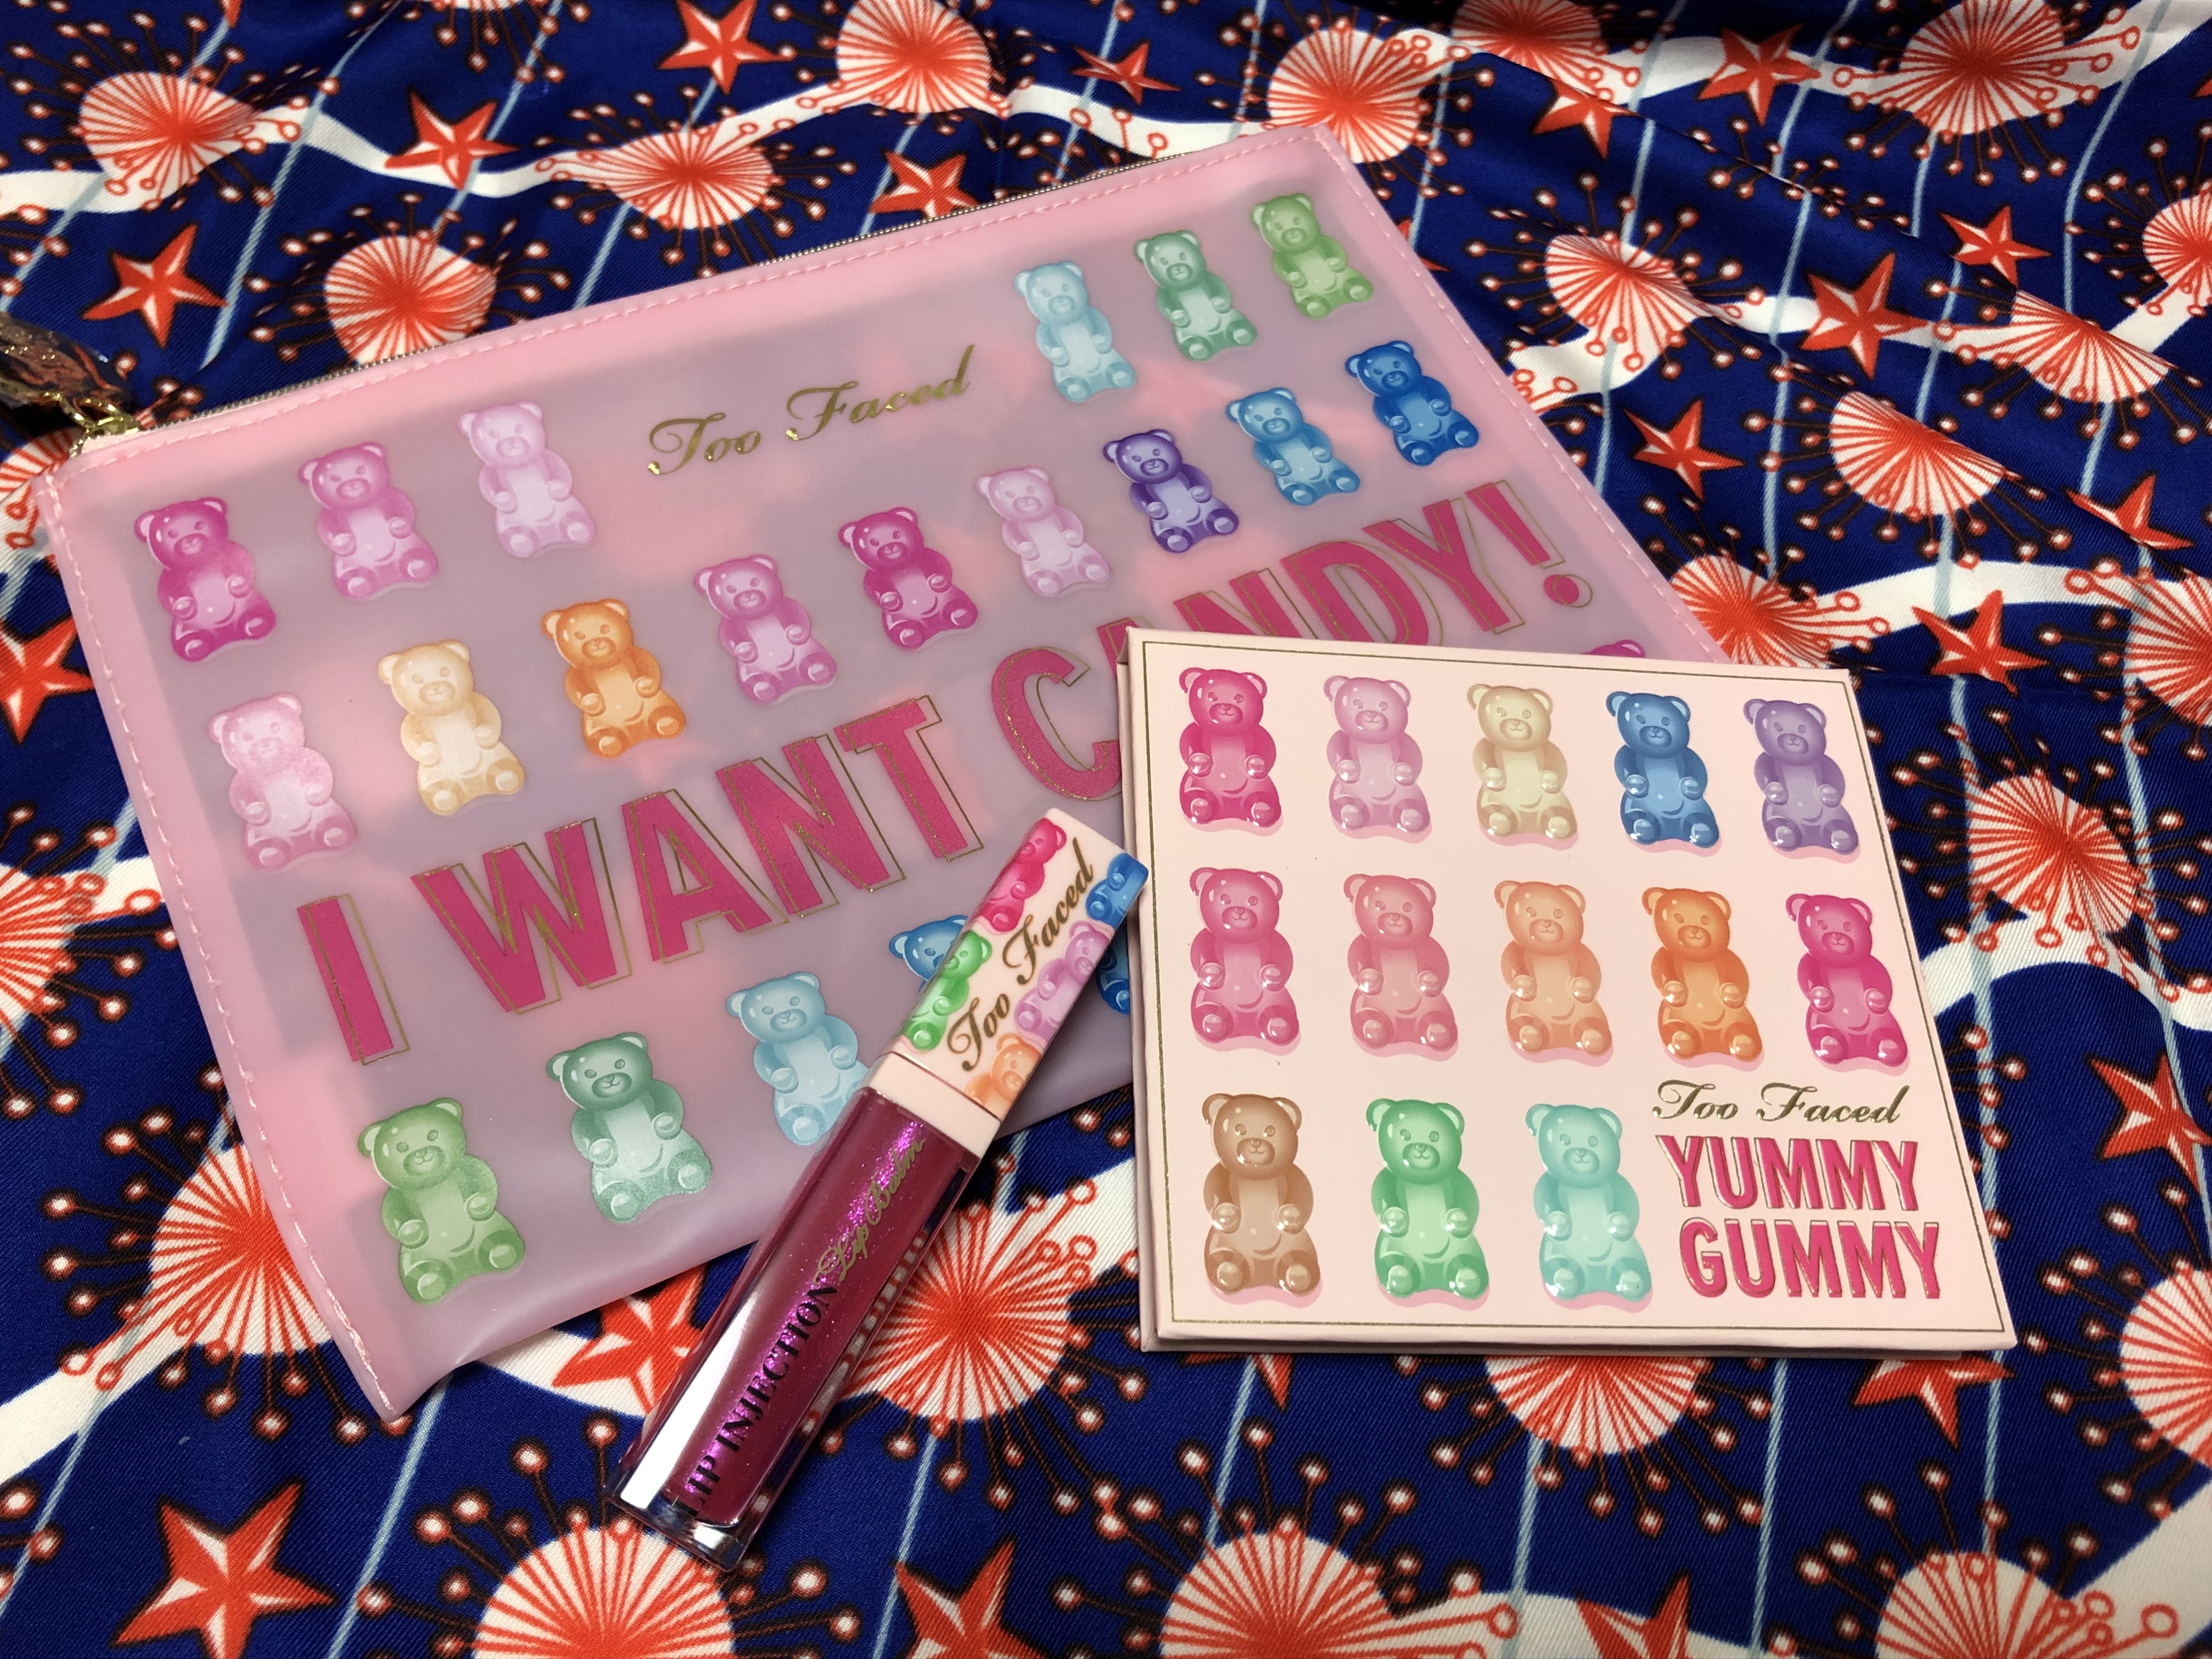 Too Faced／ヤミー ガミー メイクアップ コレクションキット/セット